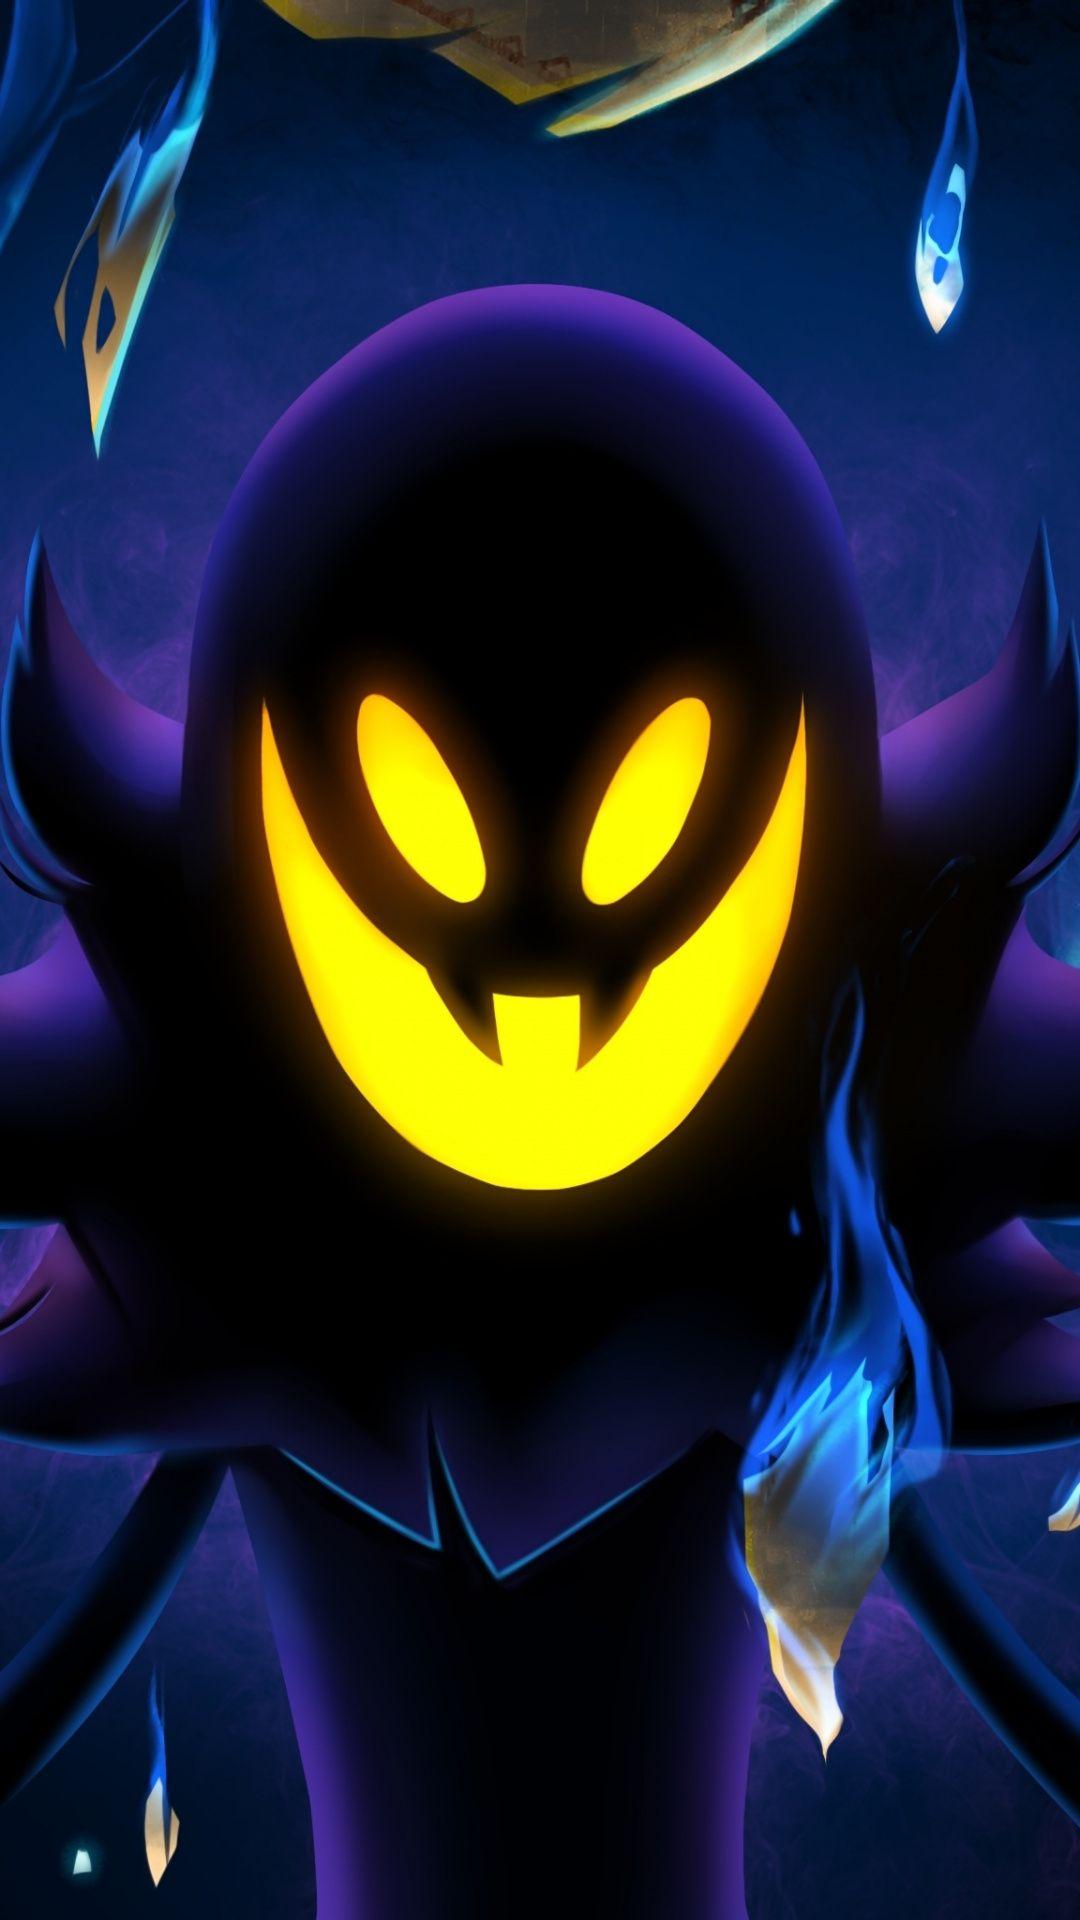 Ghost, video game, A Hat in Time, 1080x1920 wallpaper. Video Game